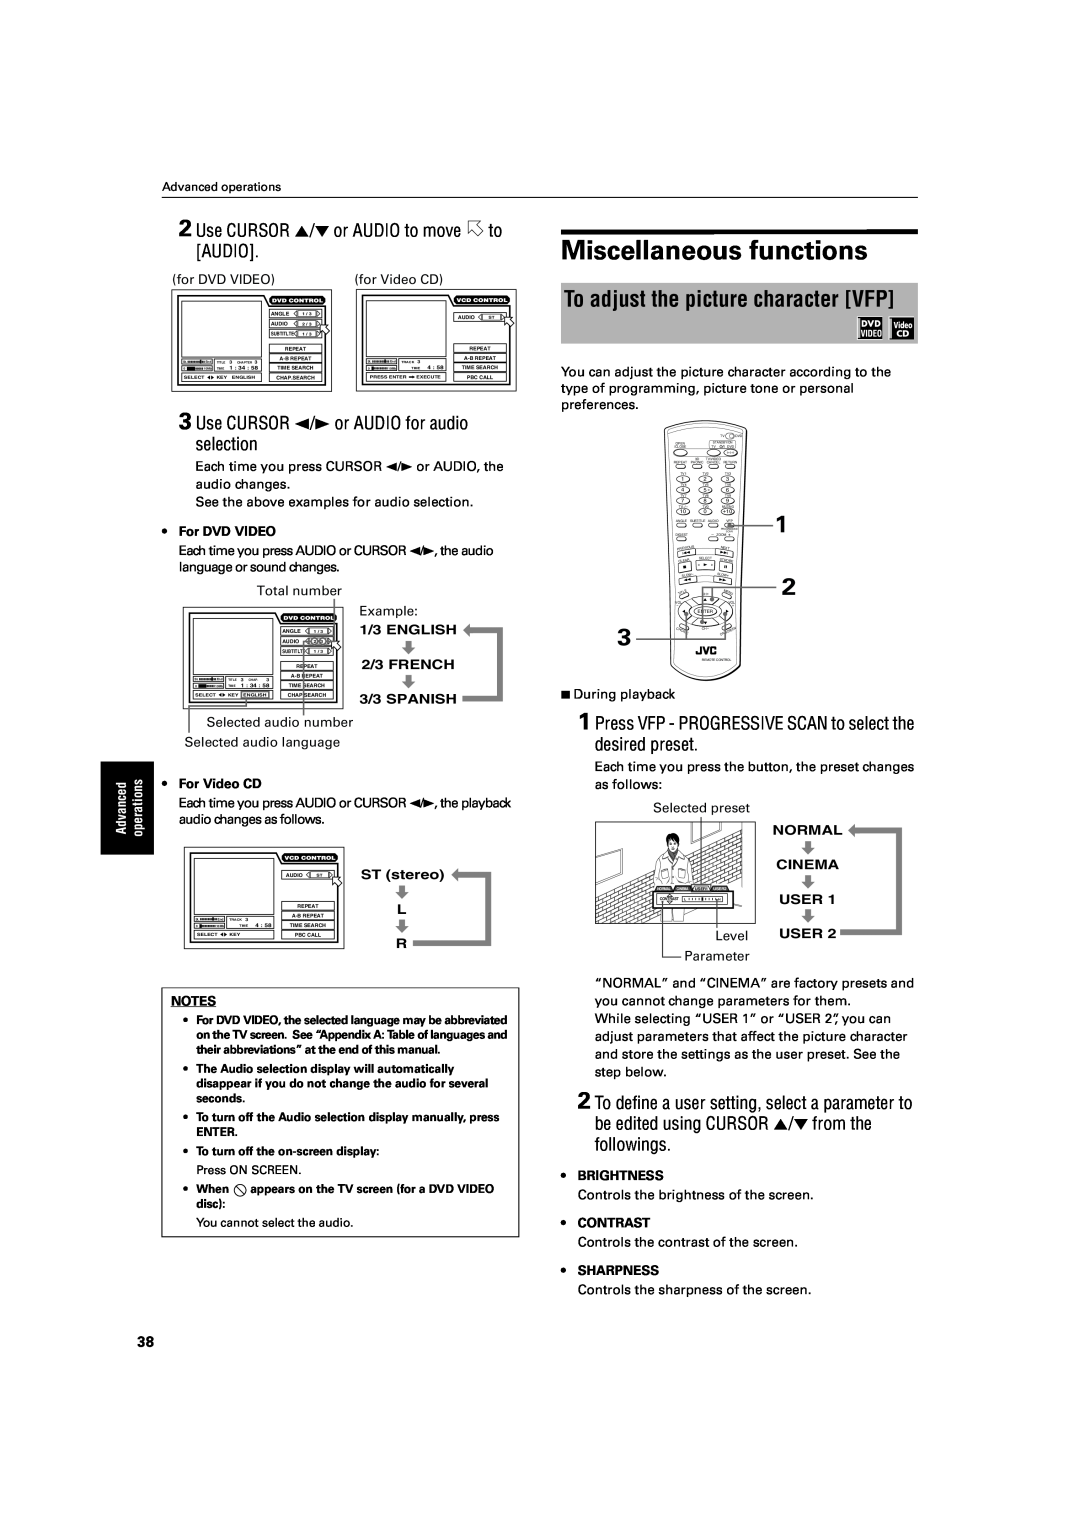 JVC XV-S60 manual Miscellaneous functions, To adjust the picture character VFP, Use CURSOR 5/∞ or AUDIO to move to AUDIO 